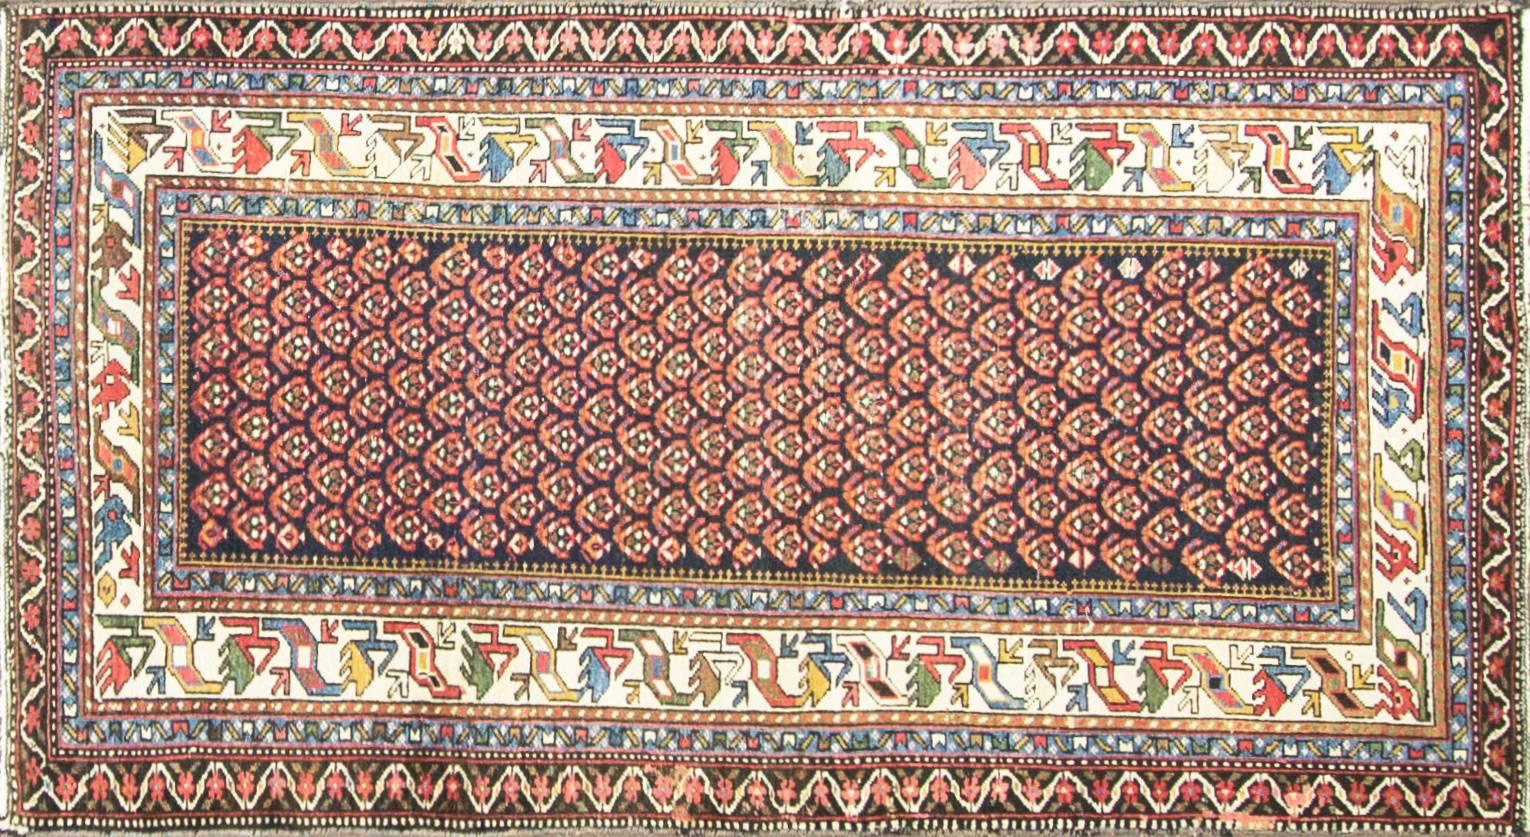 Caucasian rugs are primarily produced as village productions rather than city pieces. Made from materials particular to individual tribal provinces, the rugs of the Caucasus normally display bold geometric designs in primary colours. Styles typical